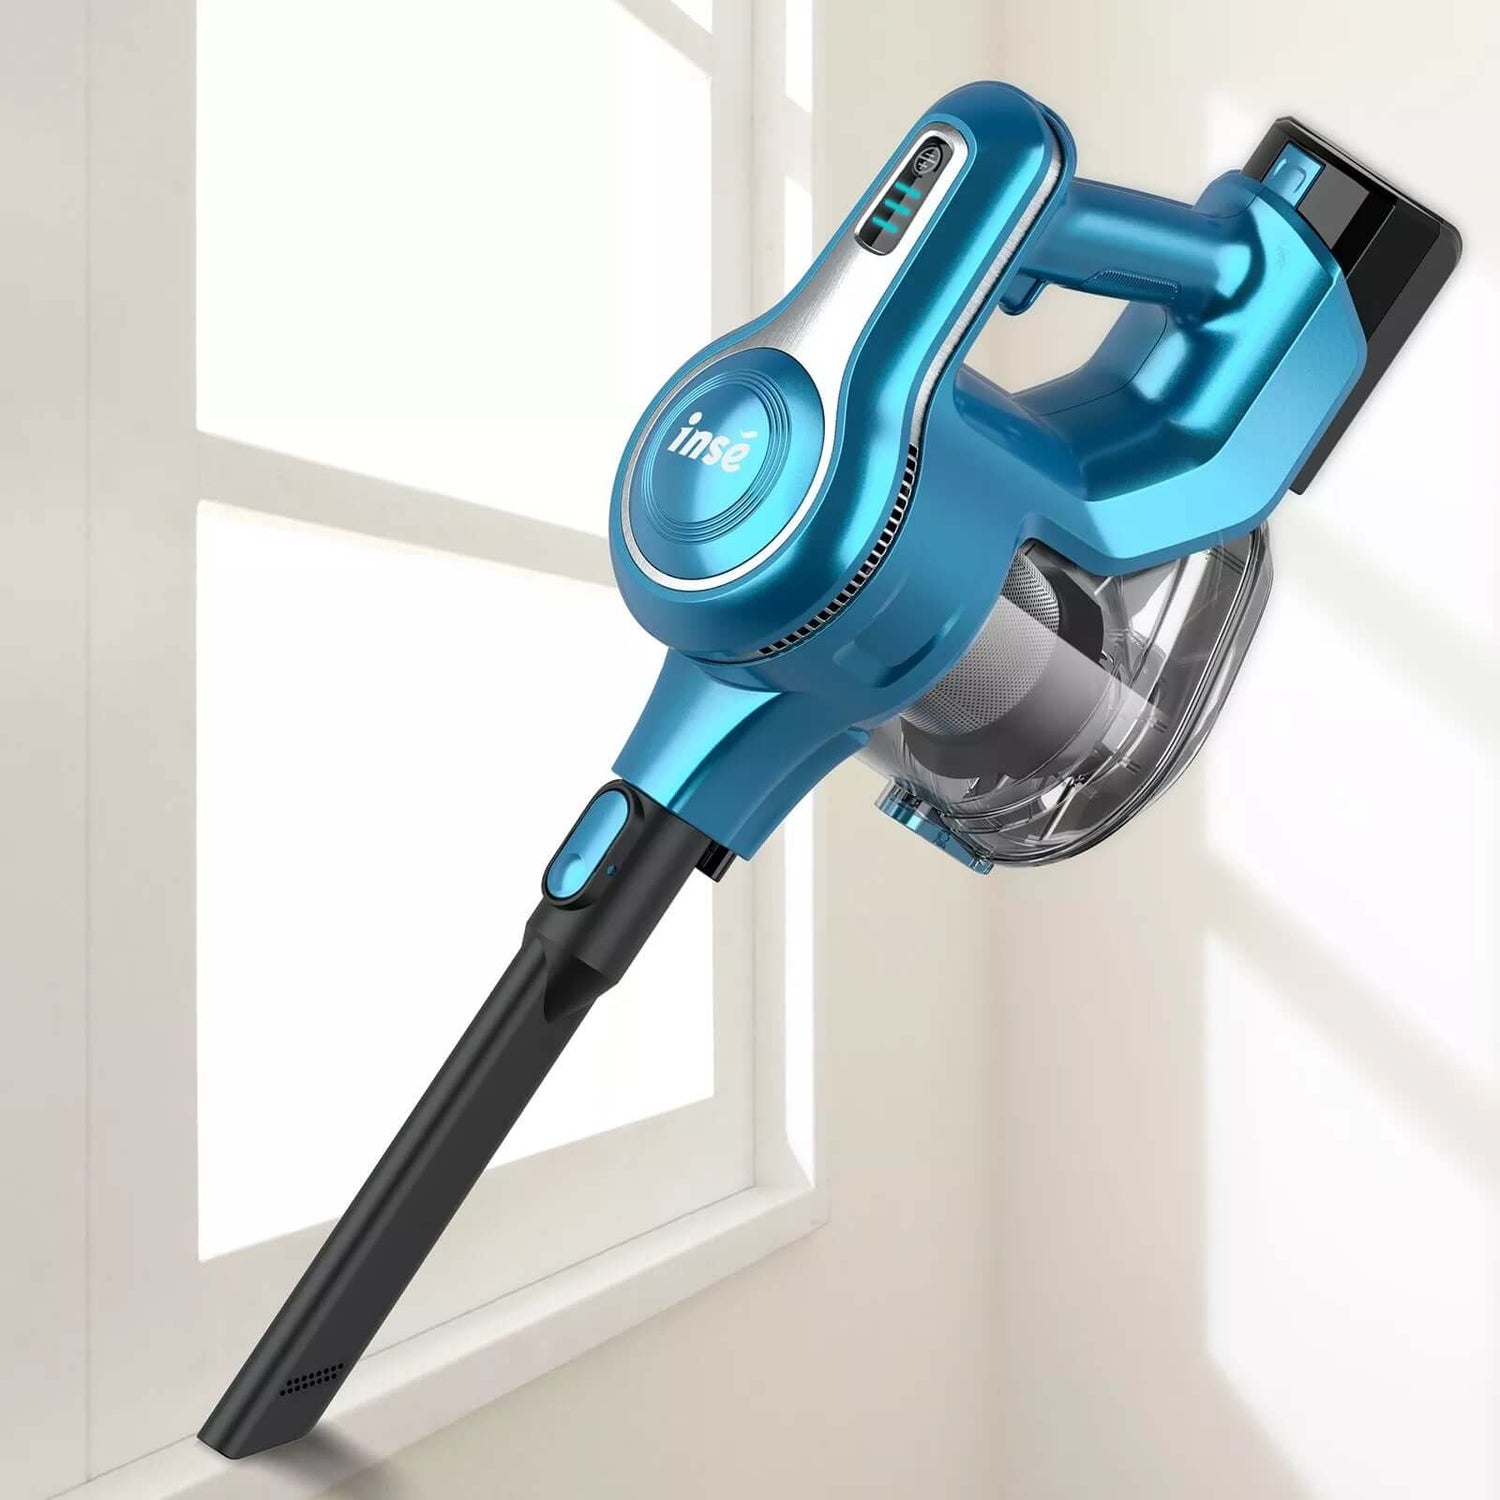 INSE S6T Cordless Vacuum clean gaps with crevice tool-inselife.com